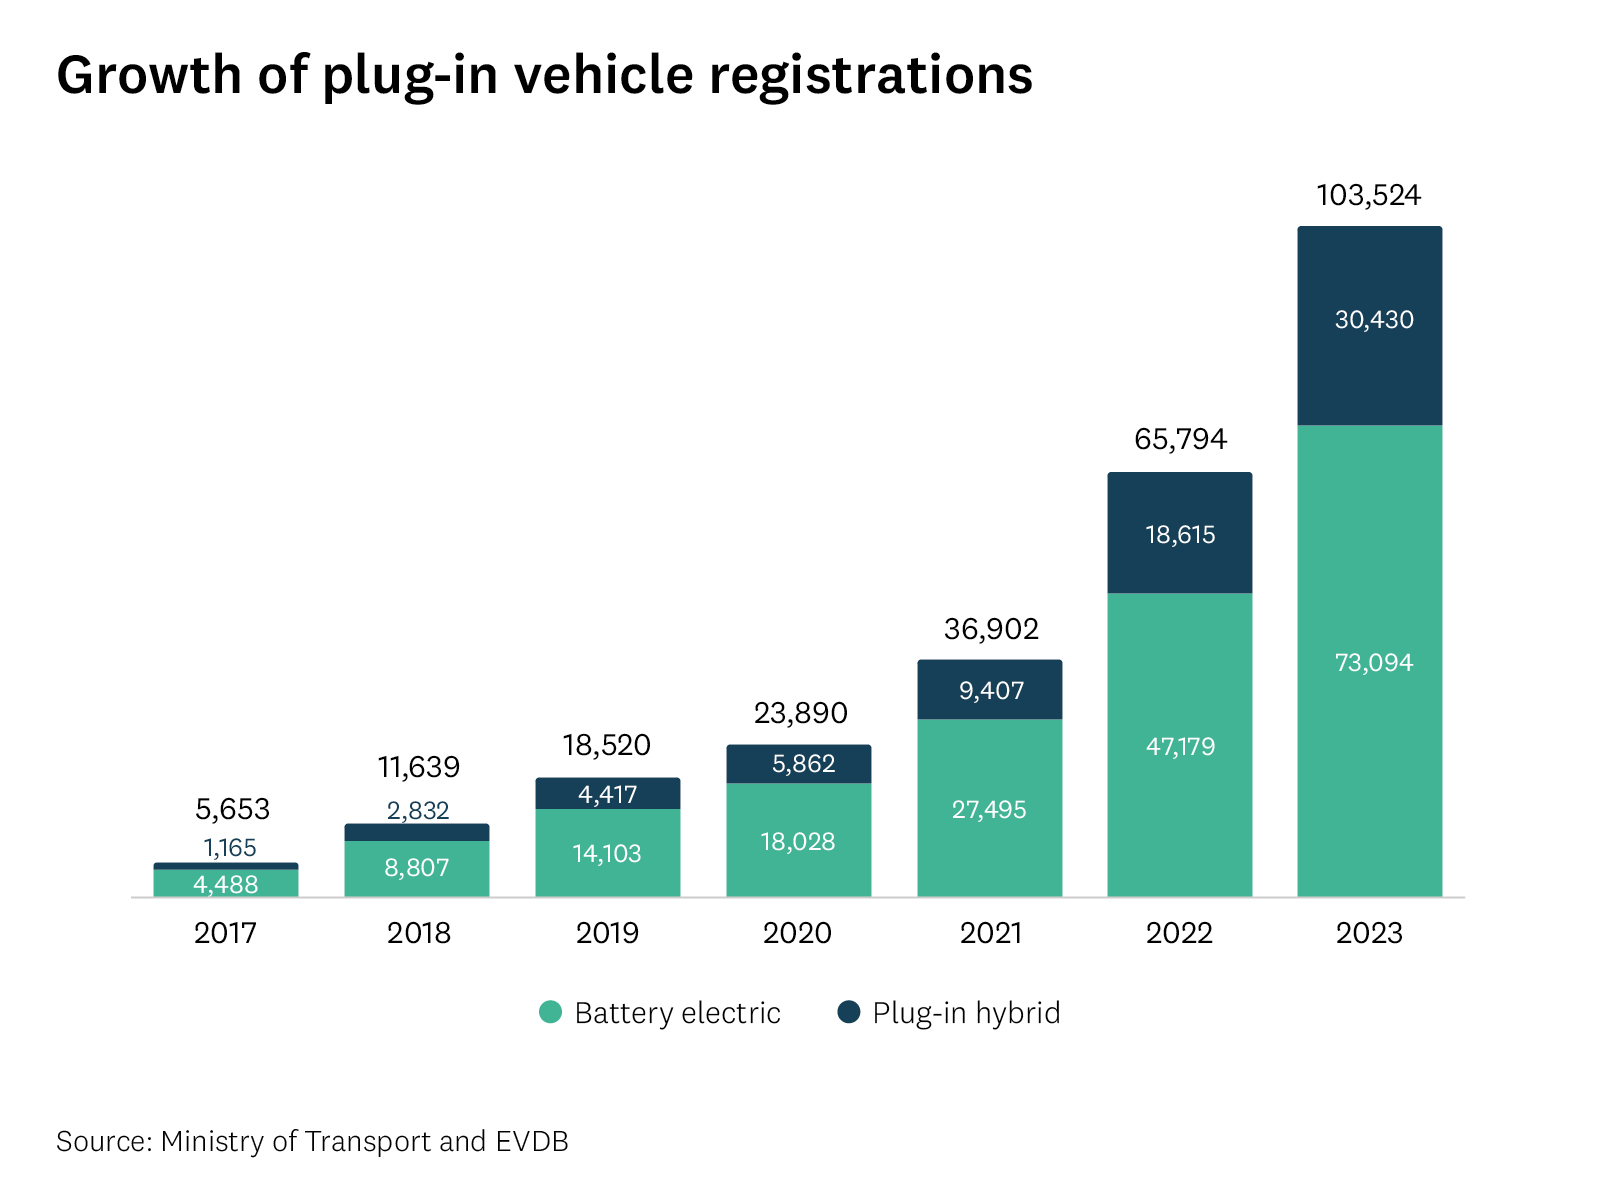 Graph shows the number of plug-in vehicle registrations each year from 2017 to 2023. 